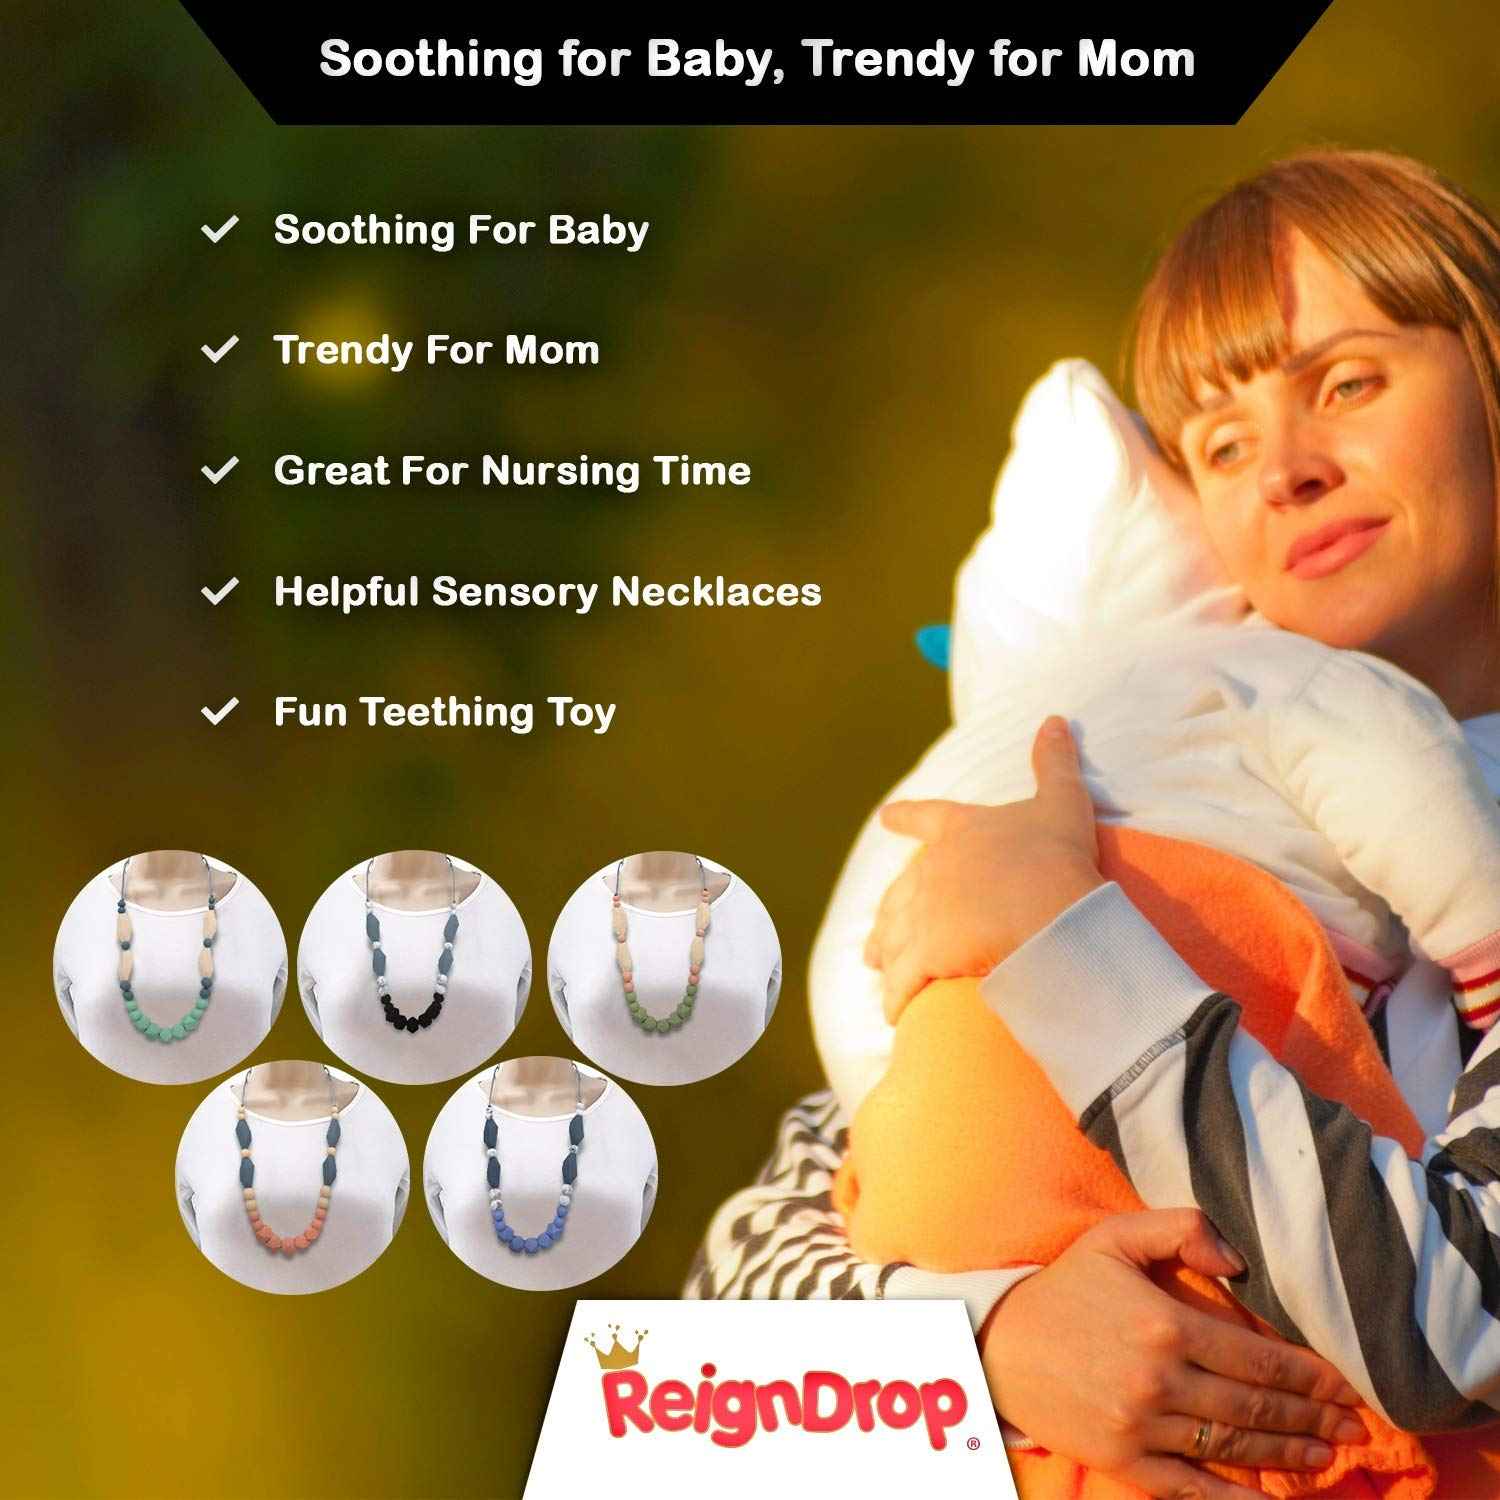 Silicone Teething Necklace for Mom To Wear (Blue/Marble/Grey)